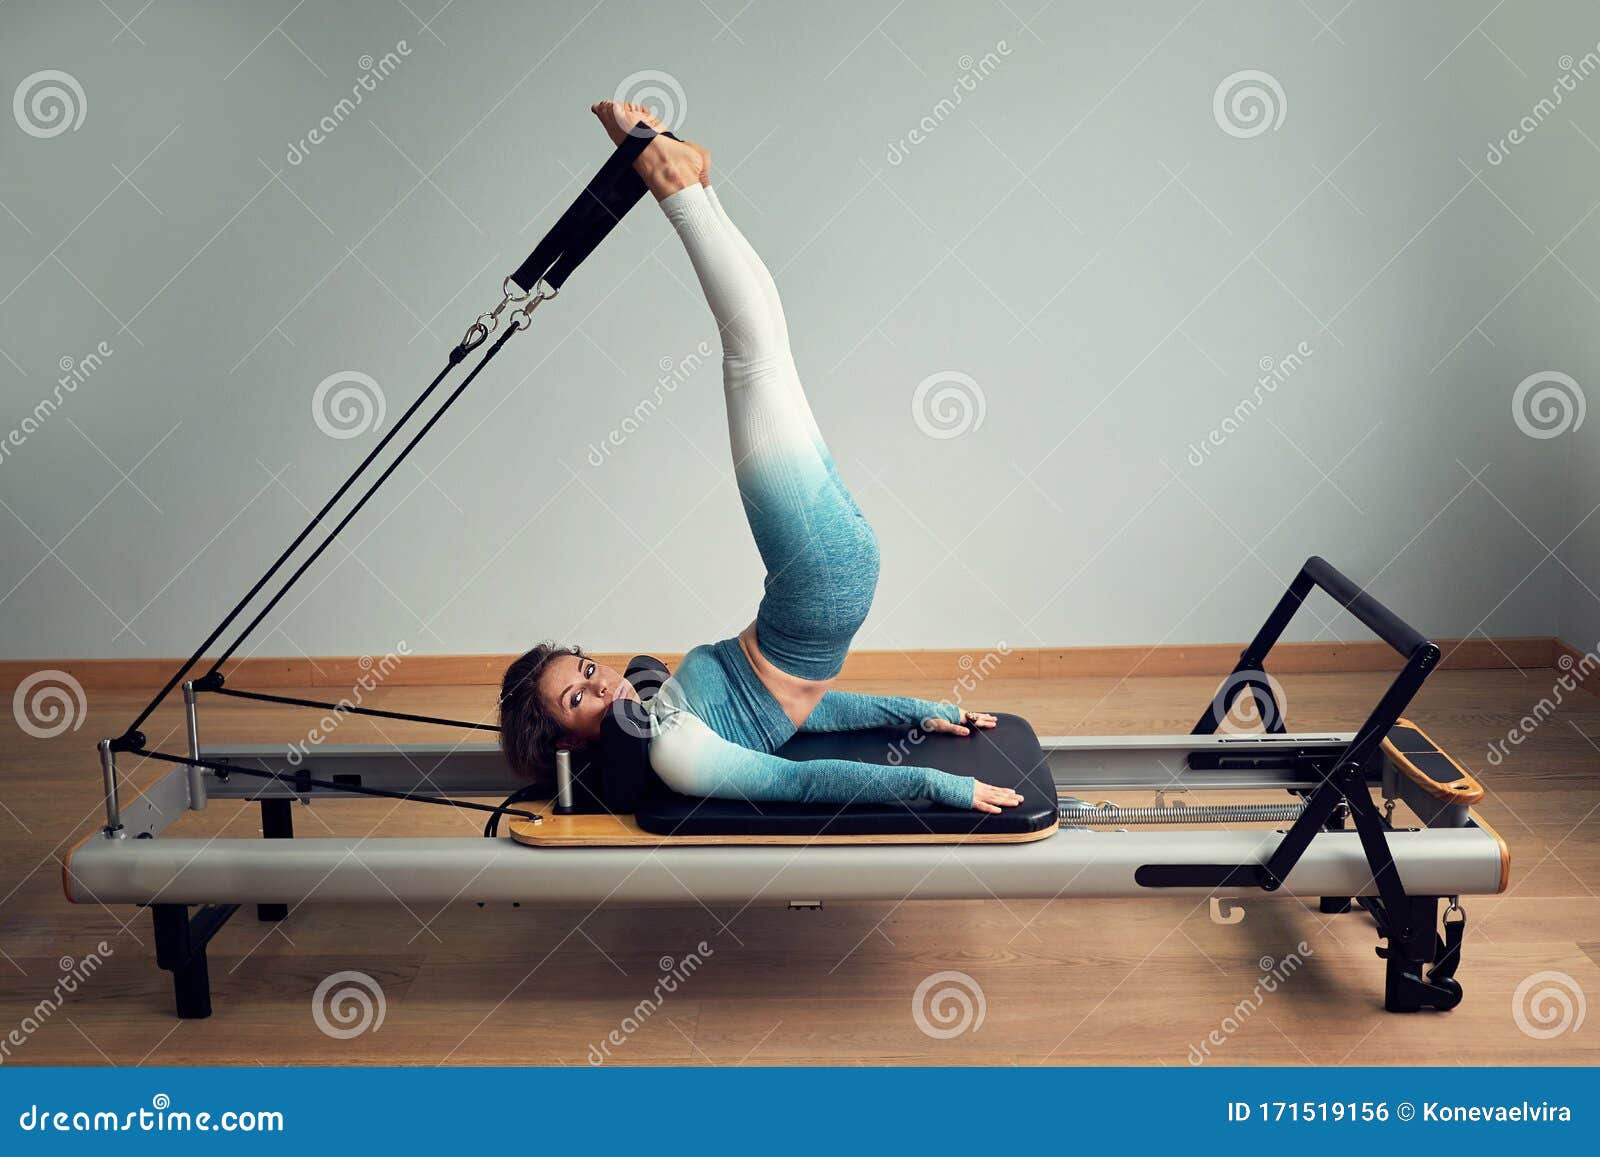 https://thumbs.dreamstime.com/z/young-asian-woman-pilates-stretching-sport-reformer-bed-instructor-girl-studio-young-asian-woman-pilates-stretching-sport-171519156.jpg